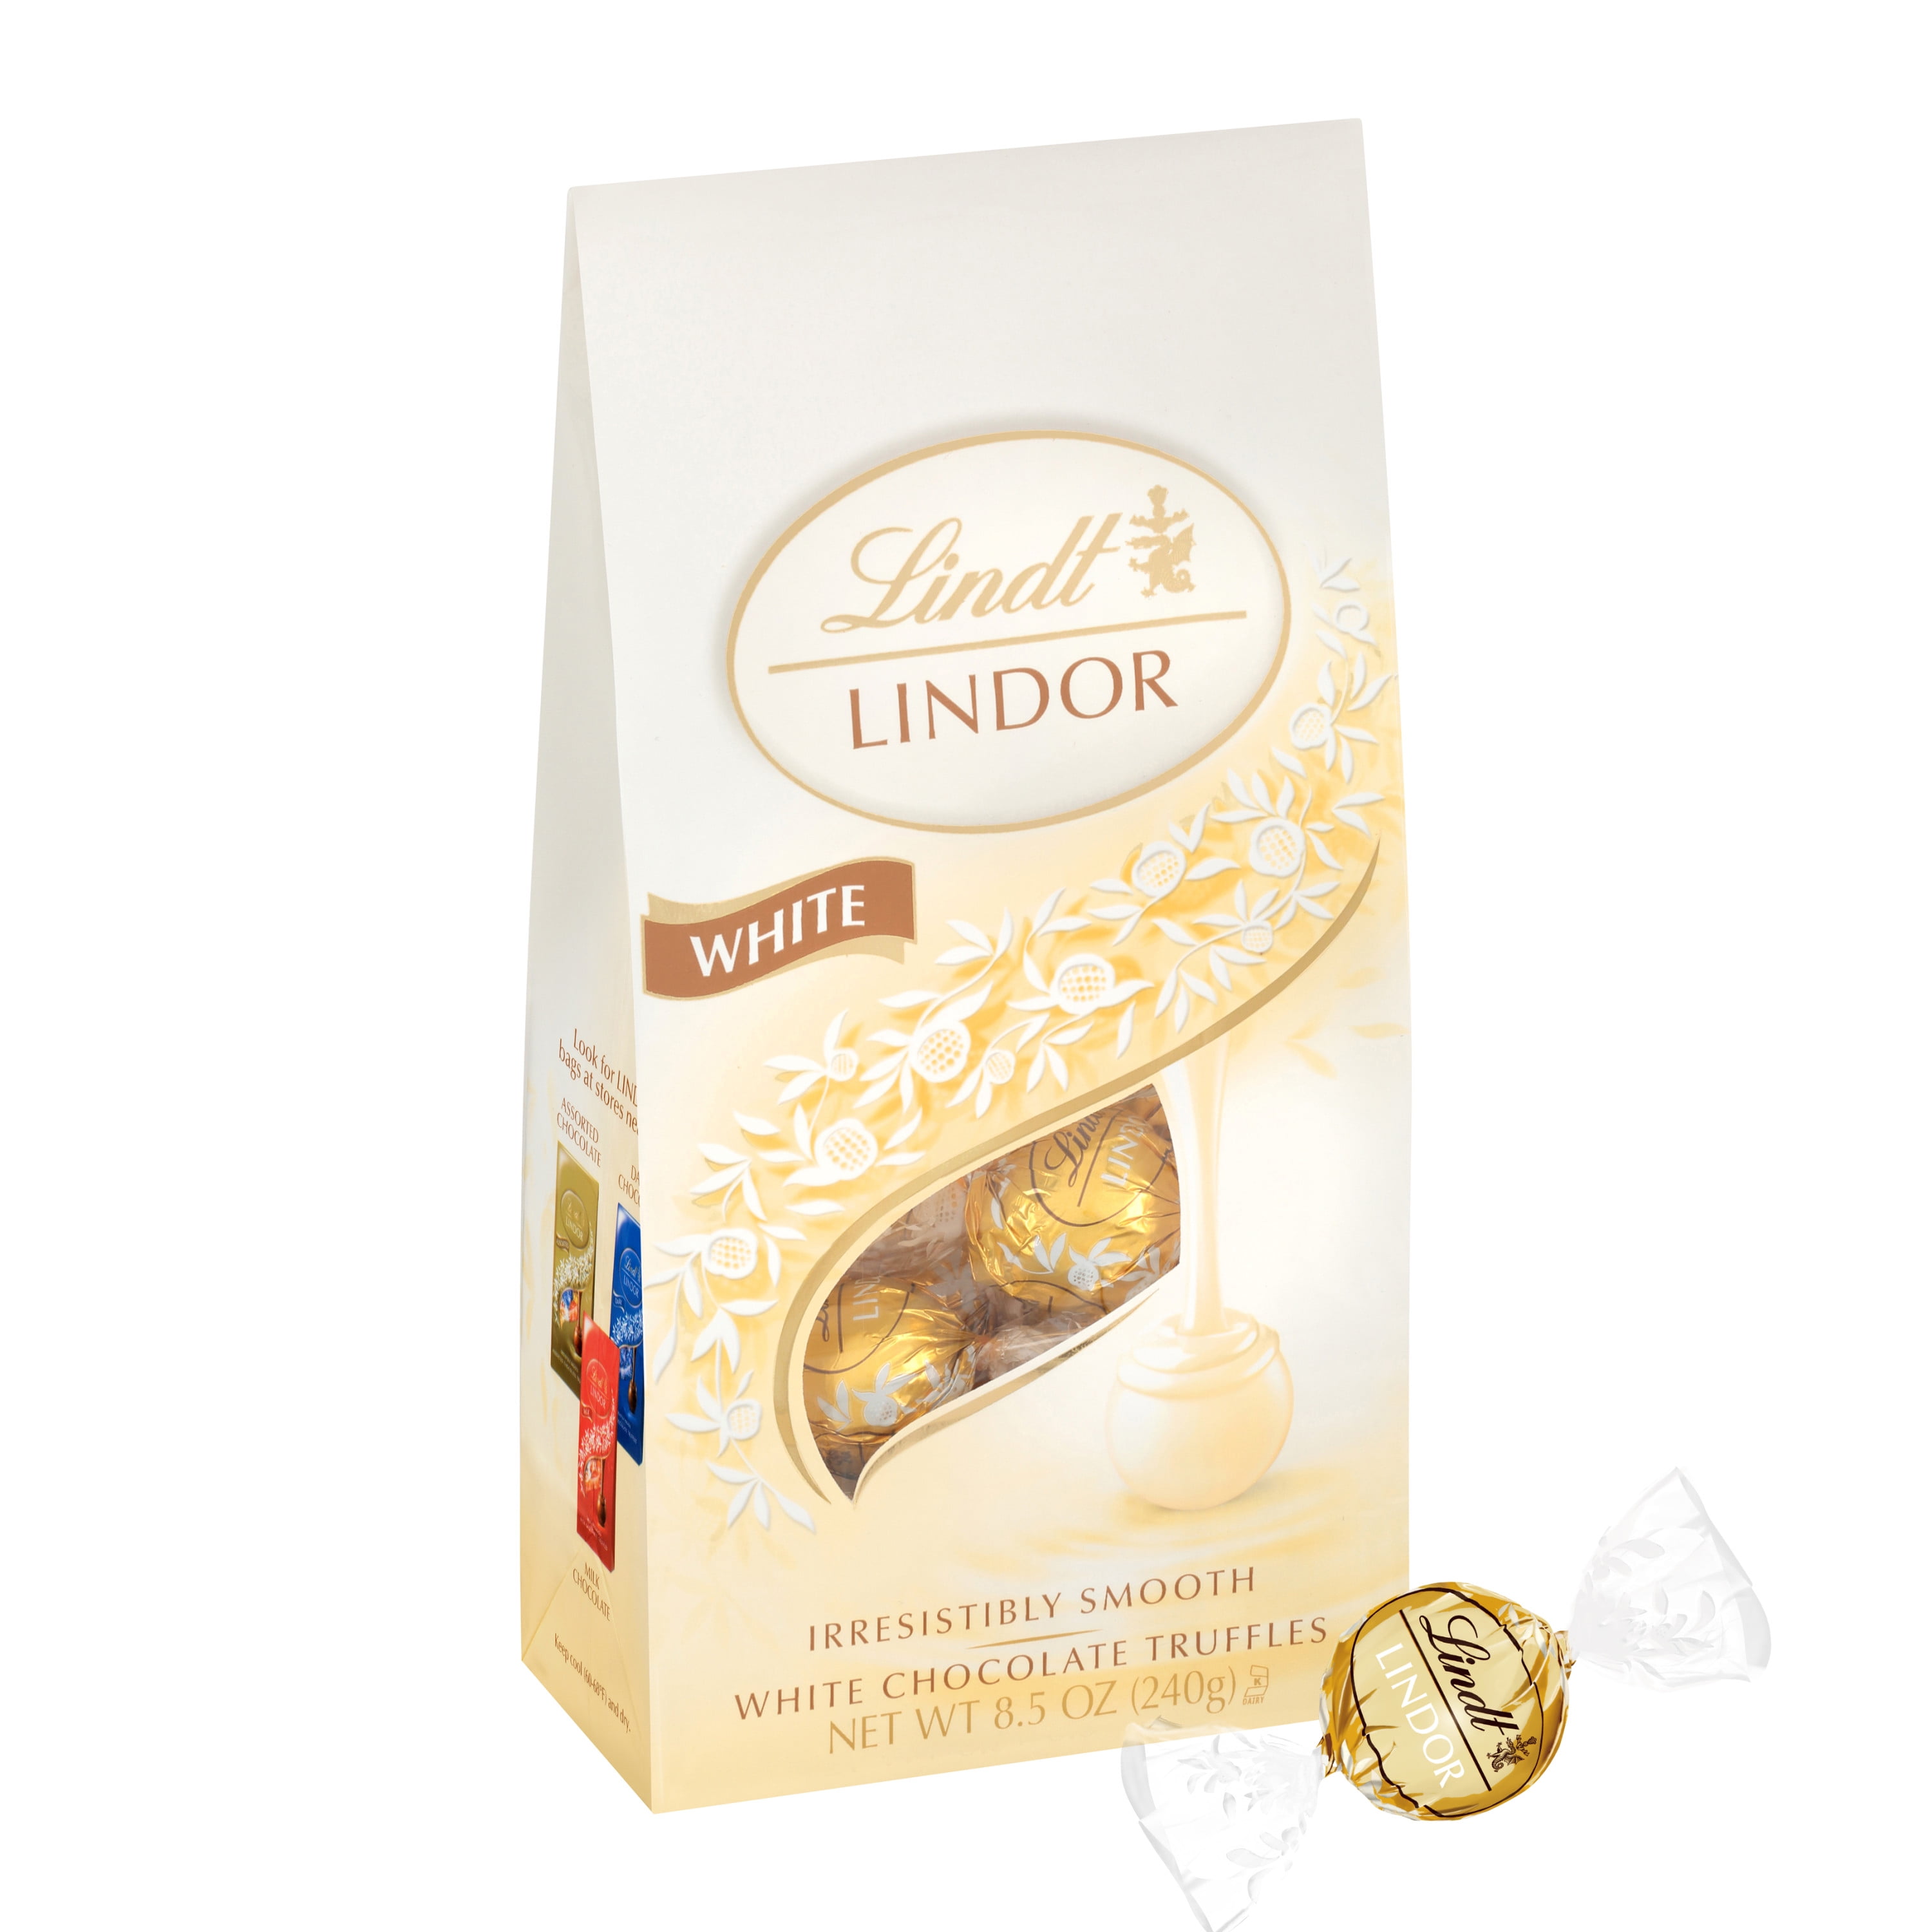 Lindt LINDOR, White Chocolate Candy Truffles, Easter Chocolate, 8.5 oz. Bag, 1 Count